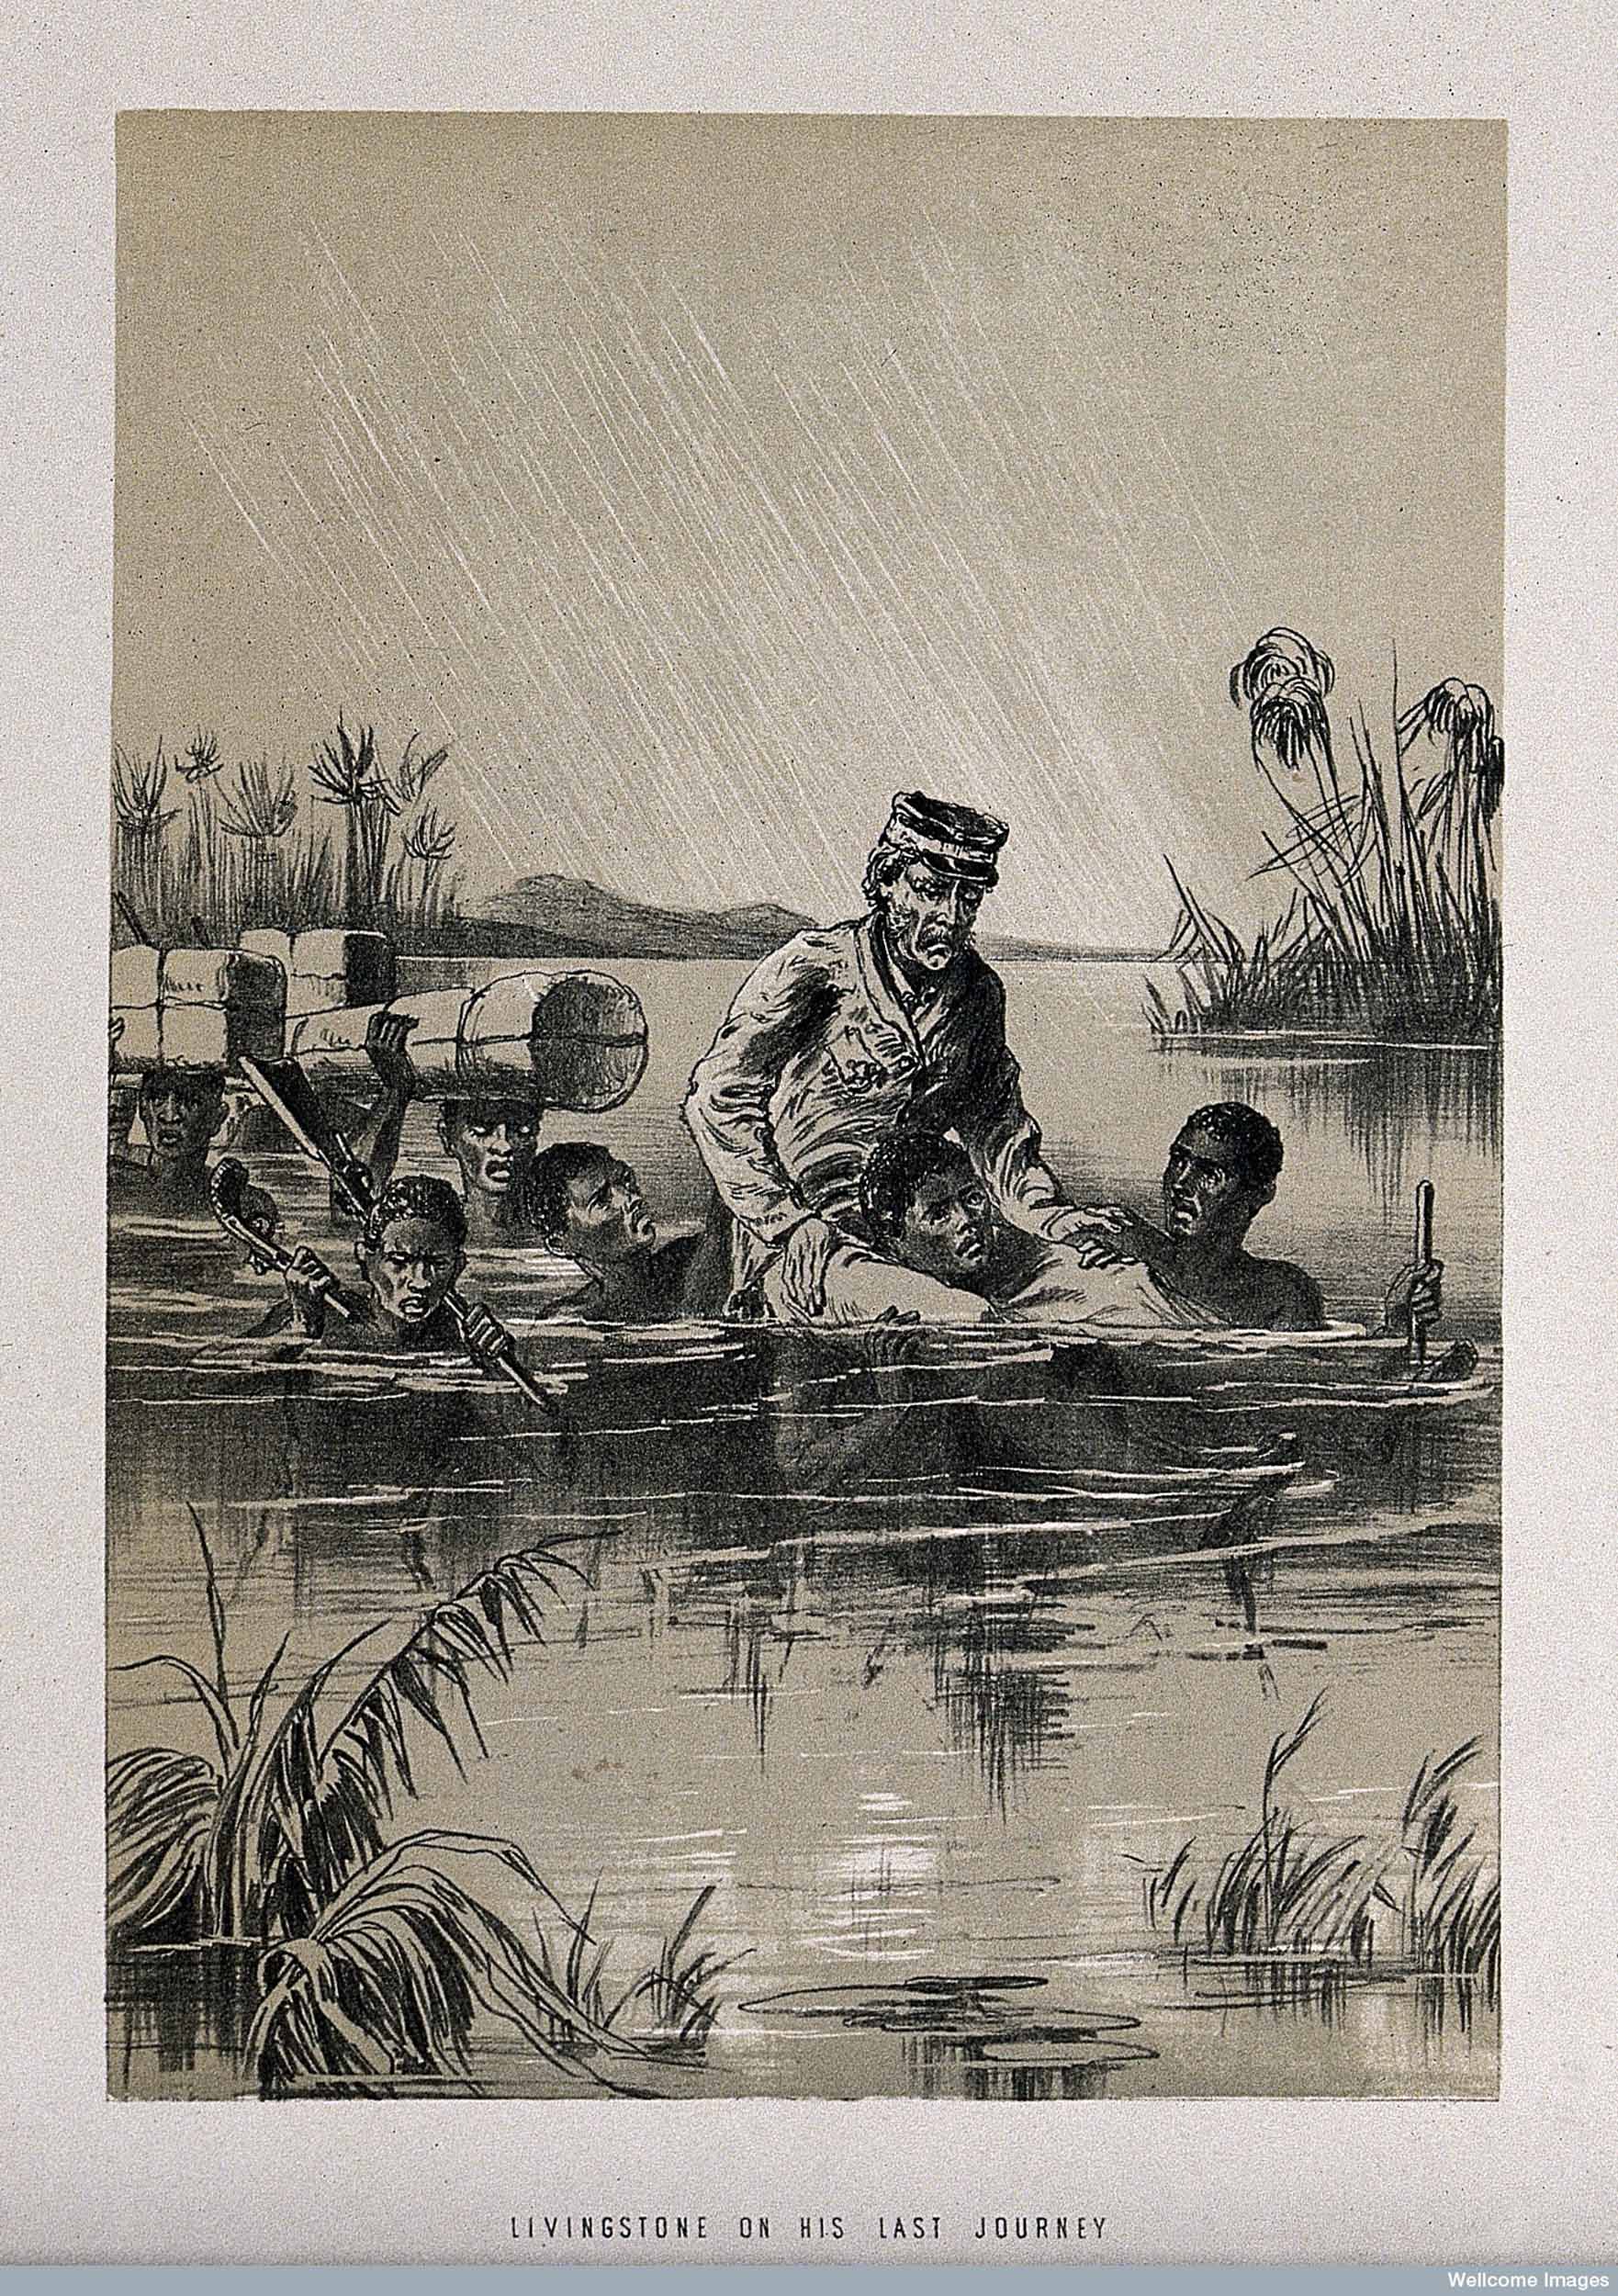 Livingstone on his last journey.. Copyright Wellcome Library, London. Creative Commons Attribution 4.0 International (https://creativecommons.org/licenses/by/4.0/).